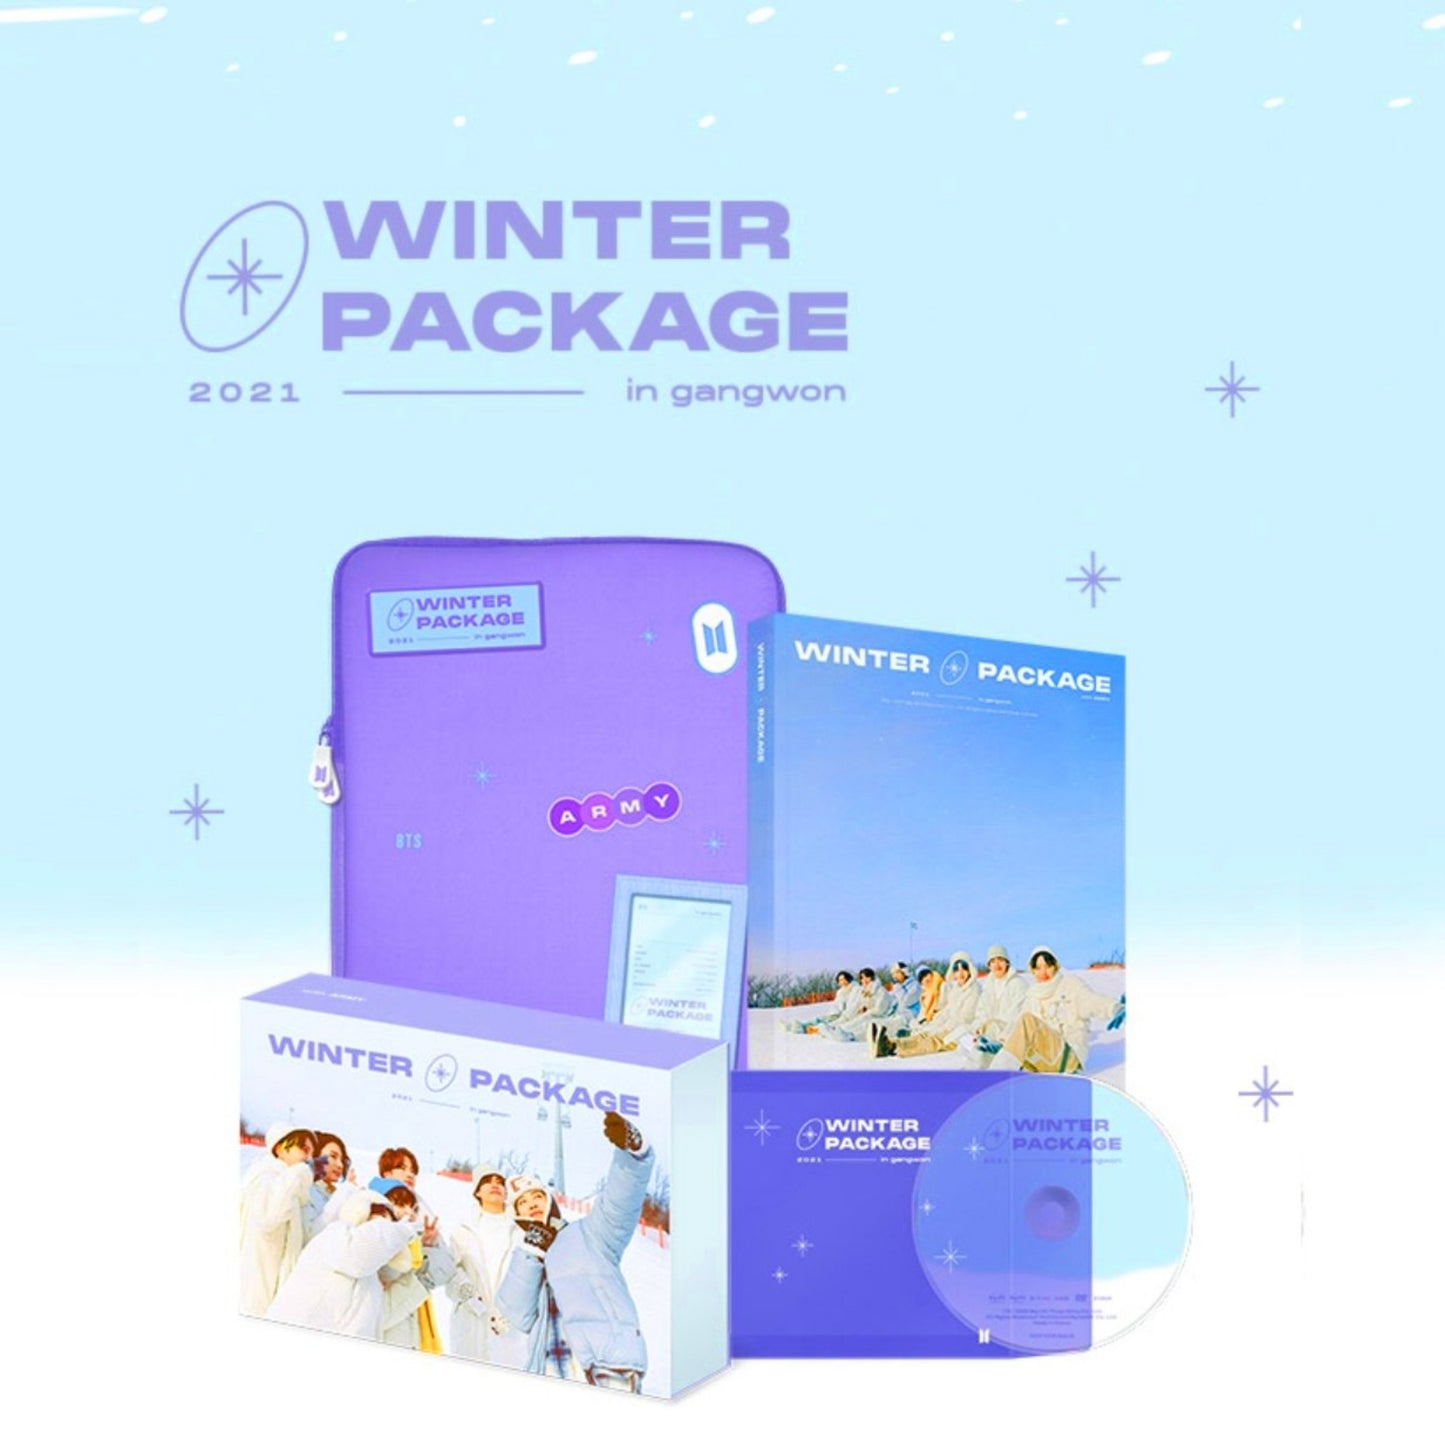 (One) BTS - Winter Package 2021